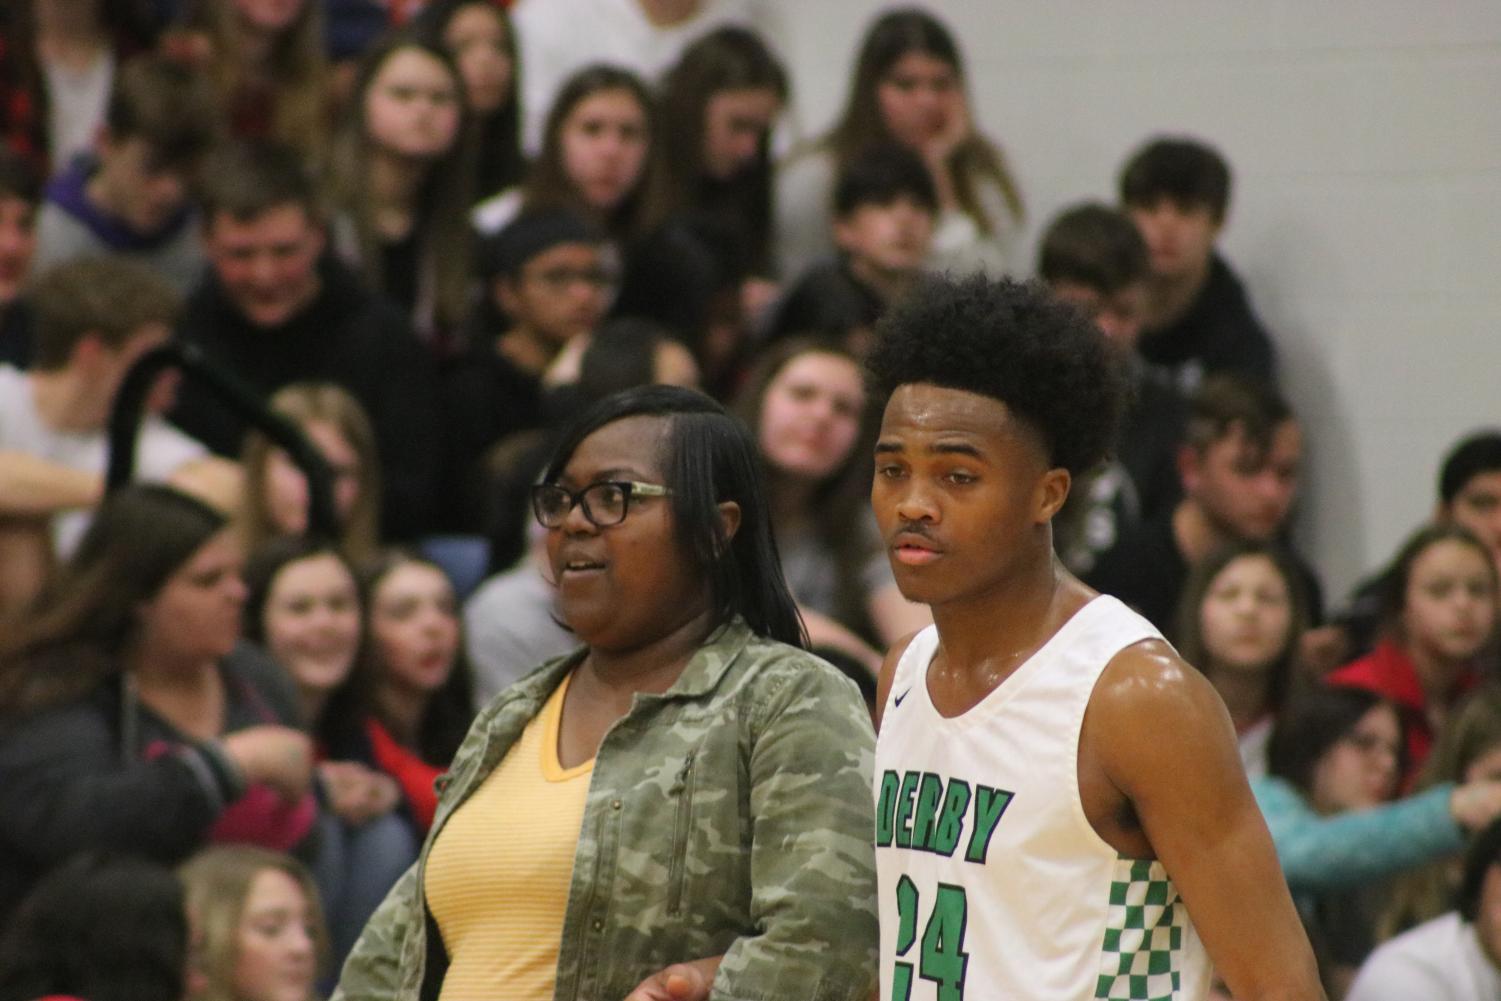 Varsity+boys+basketball+Derby+vs.+Campus%2C+Mr.+Panther+at+Halftime+%28Photos+by+Jay+Warrick%29